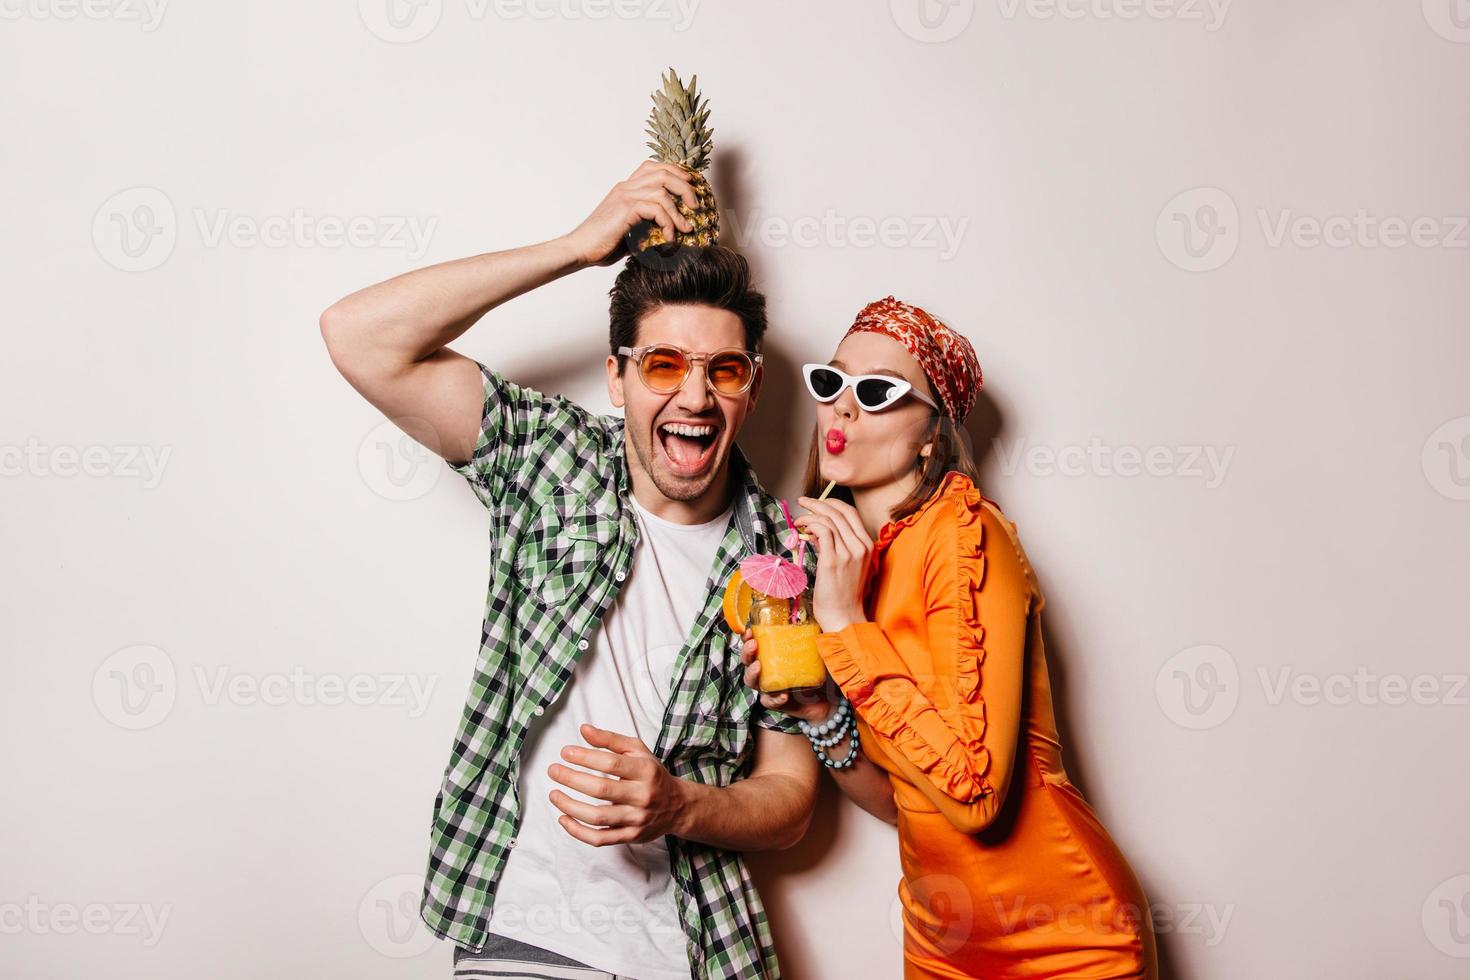 Man in orange glasses holds pineapple on his head and laughs. Woman in bright dress and sunglasses photo